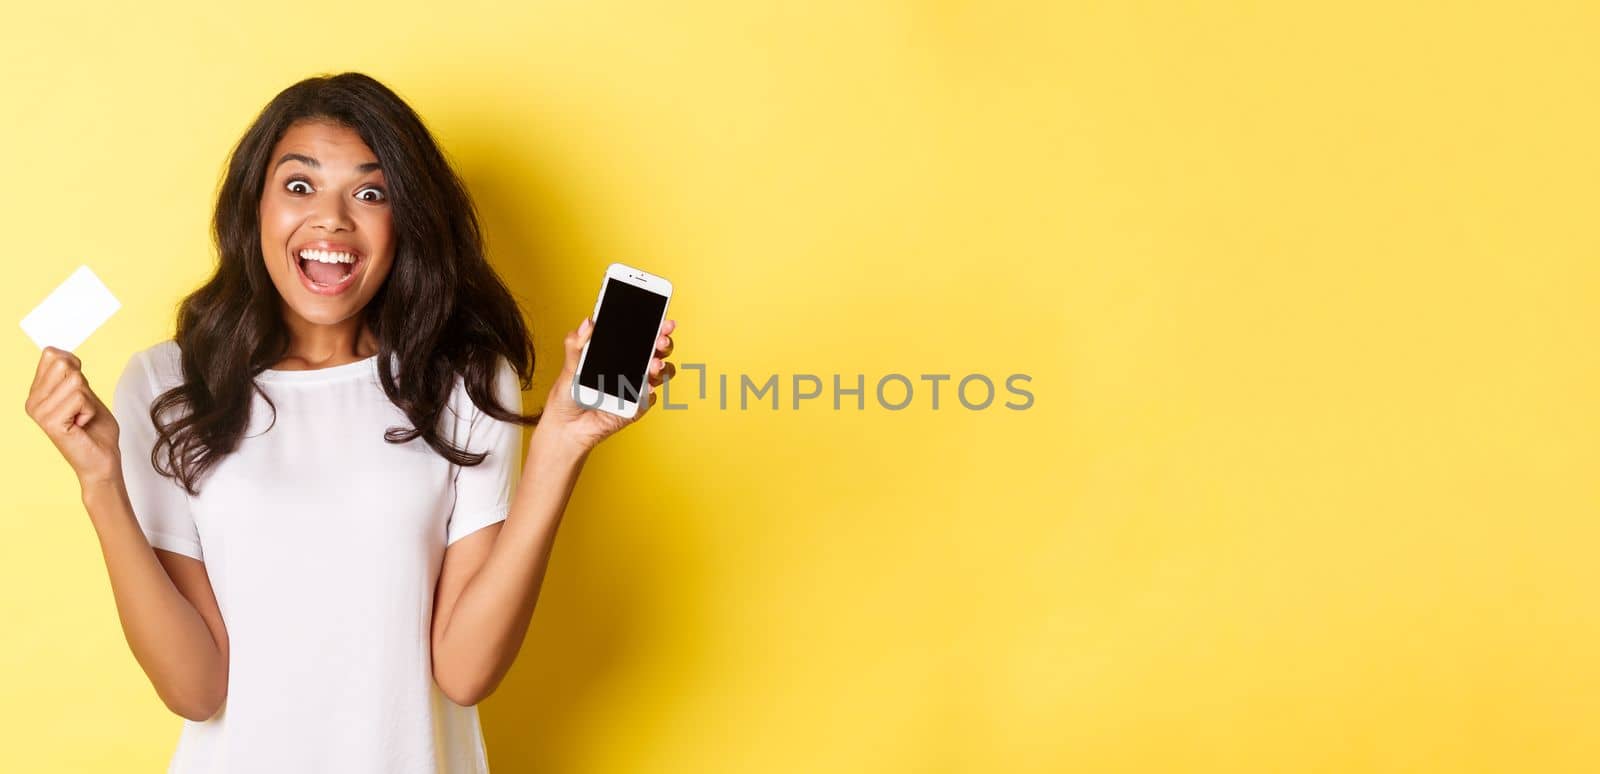 Image of excited african-american female model, showing smartphone screen and credit card, standing over yellow background.